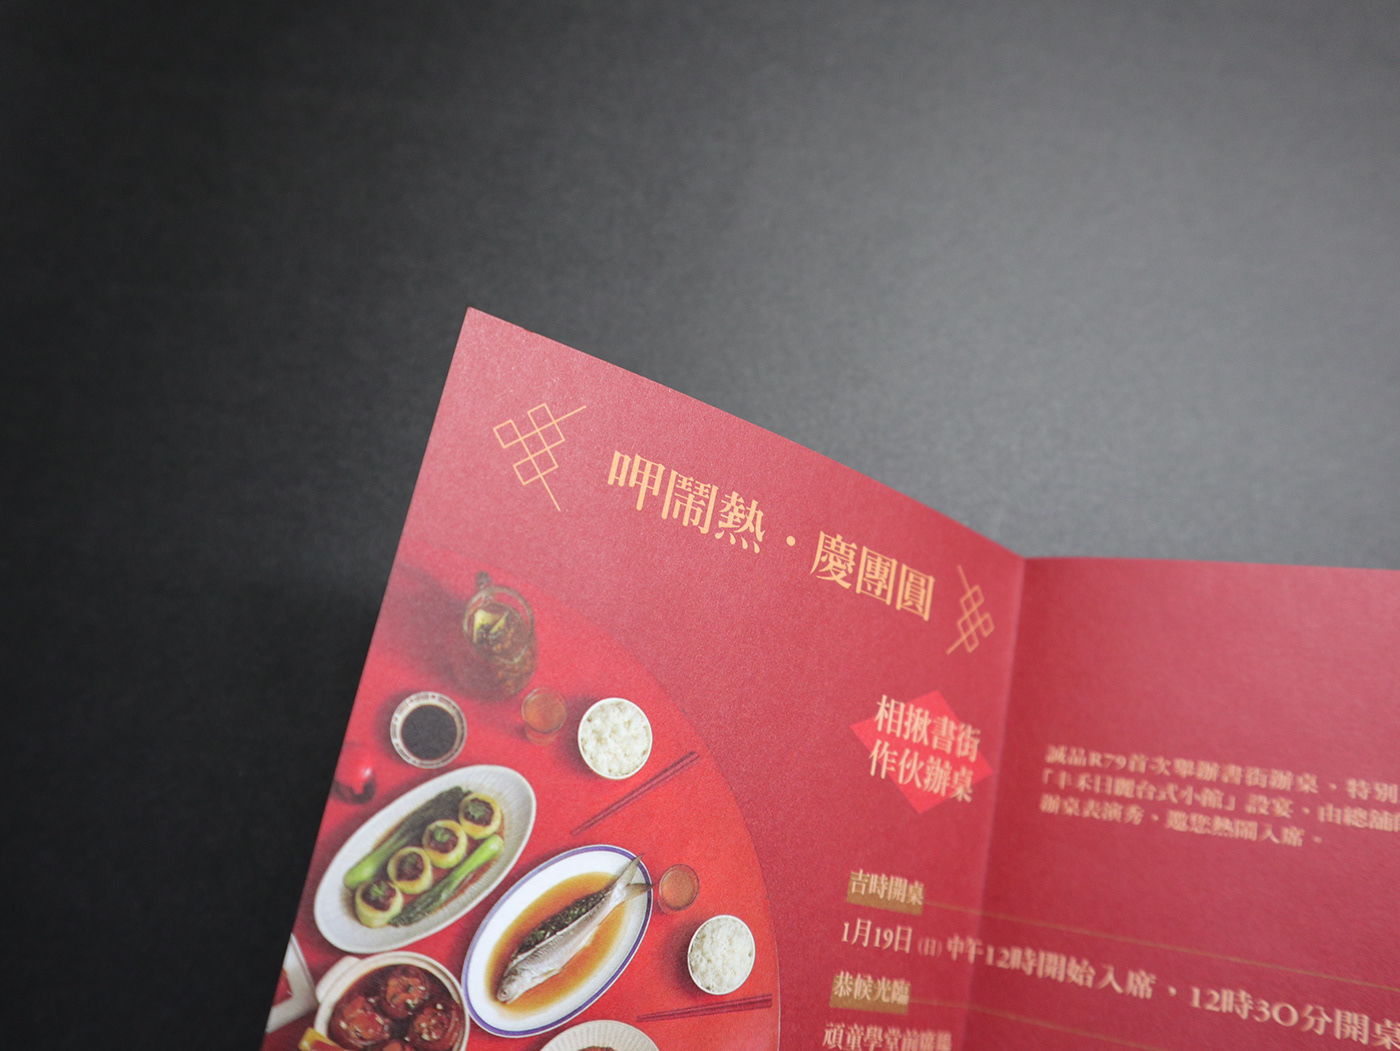 chinese new year design eslite Food  graphic design  ILLUSTRATION  pan toh red roadside banquet pamphlet